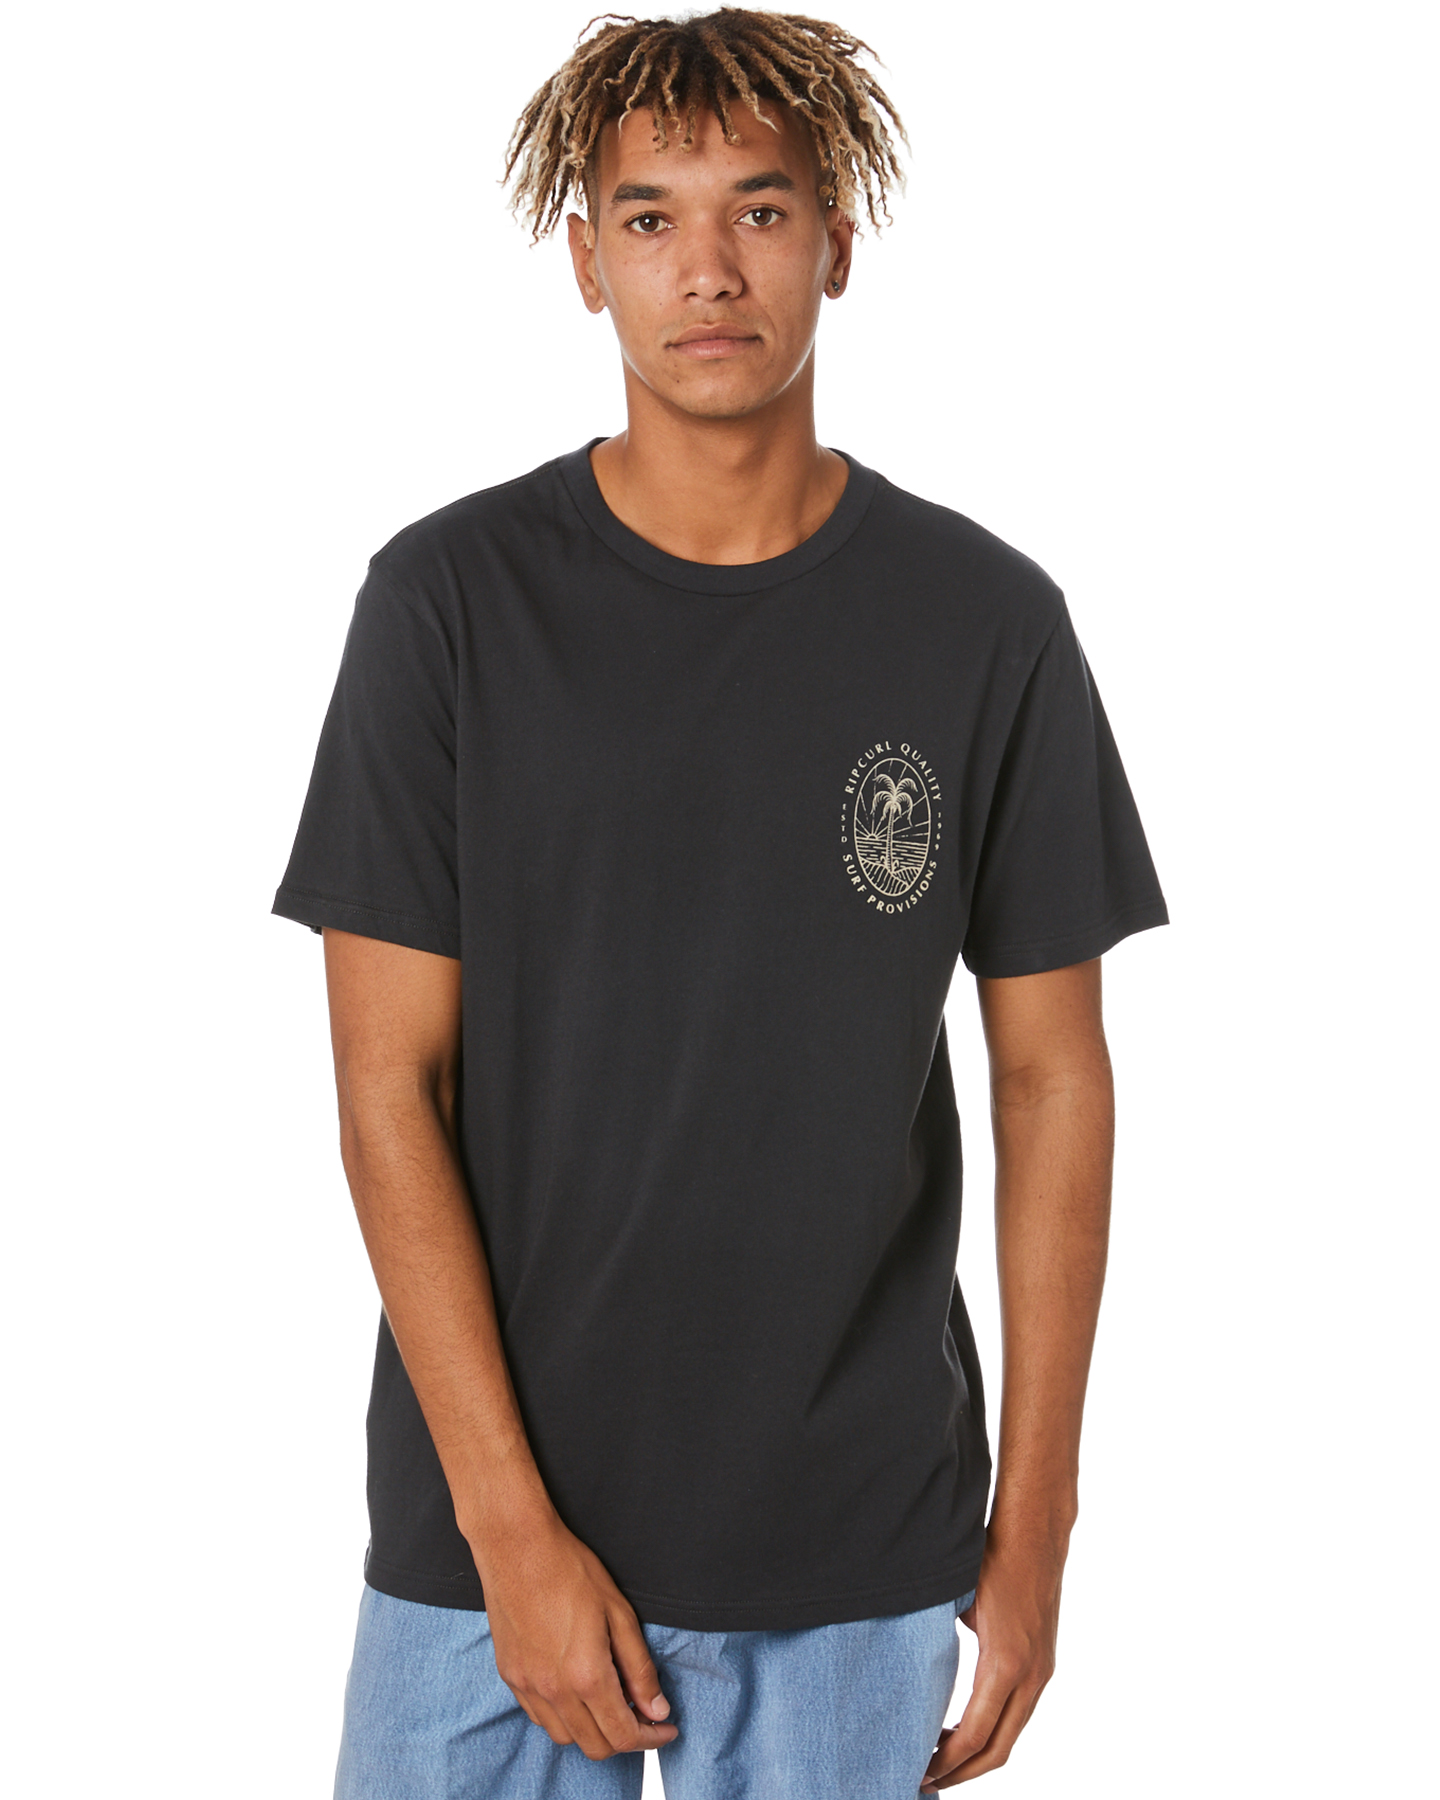 Rip Curl Utopia Mens Tee - Washed Black | SurfStitch